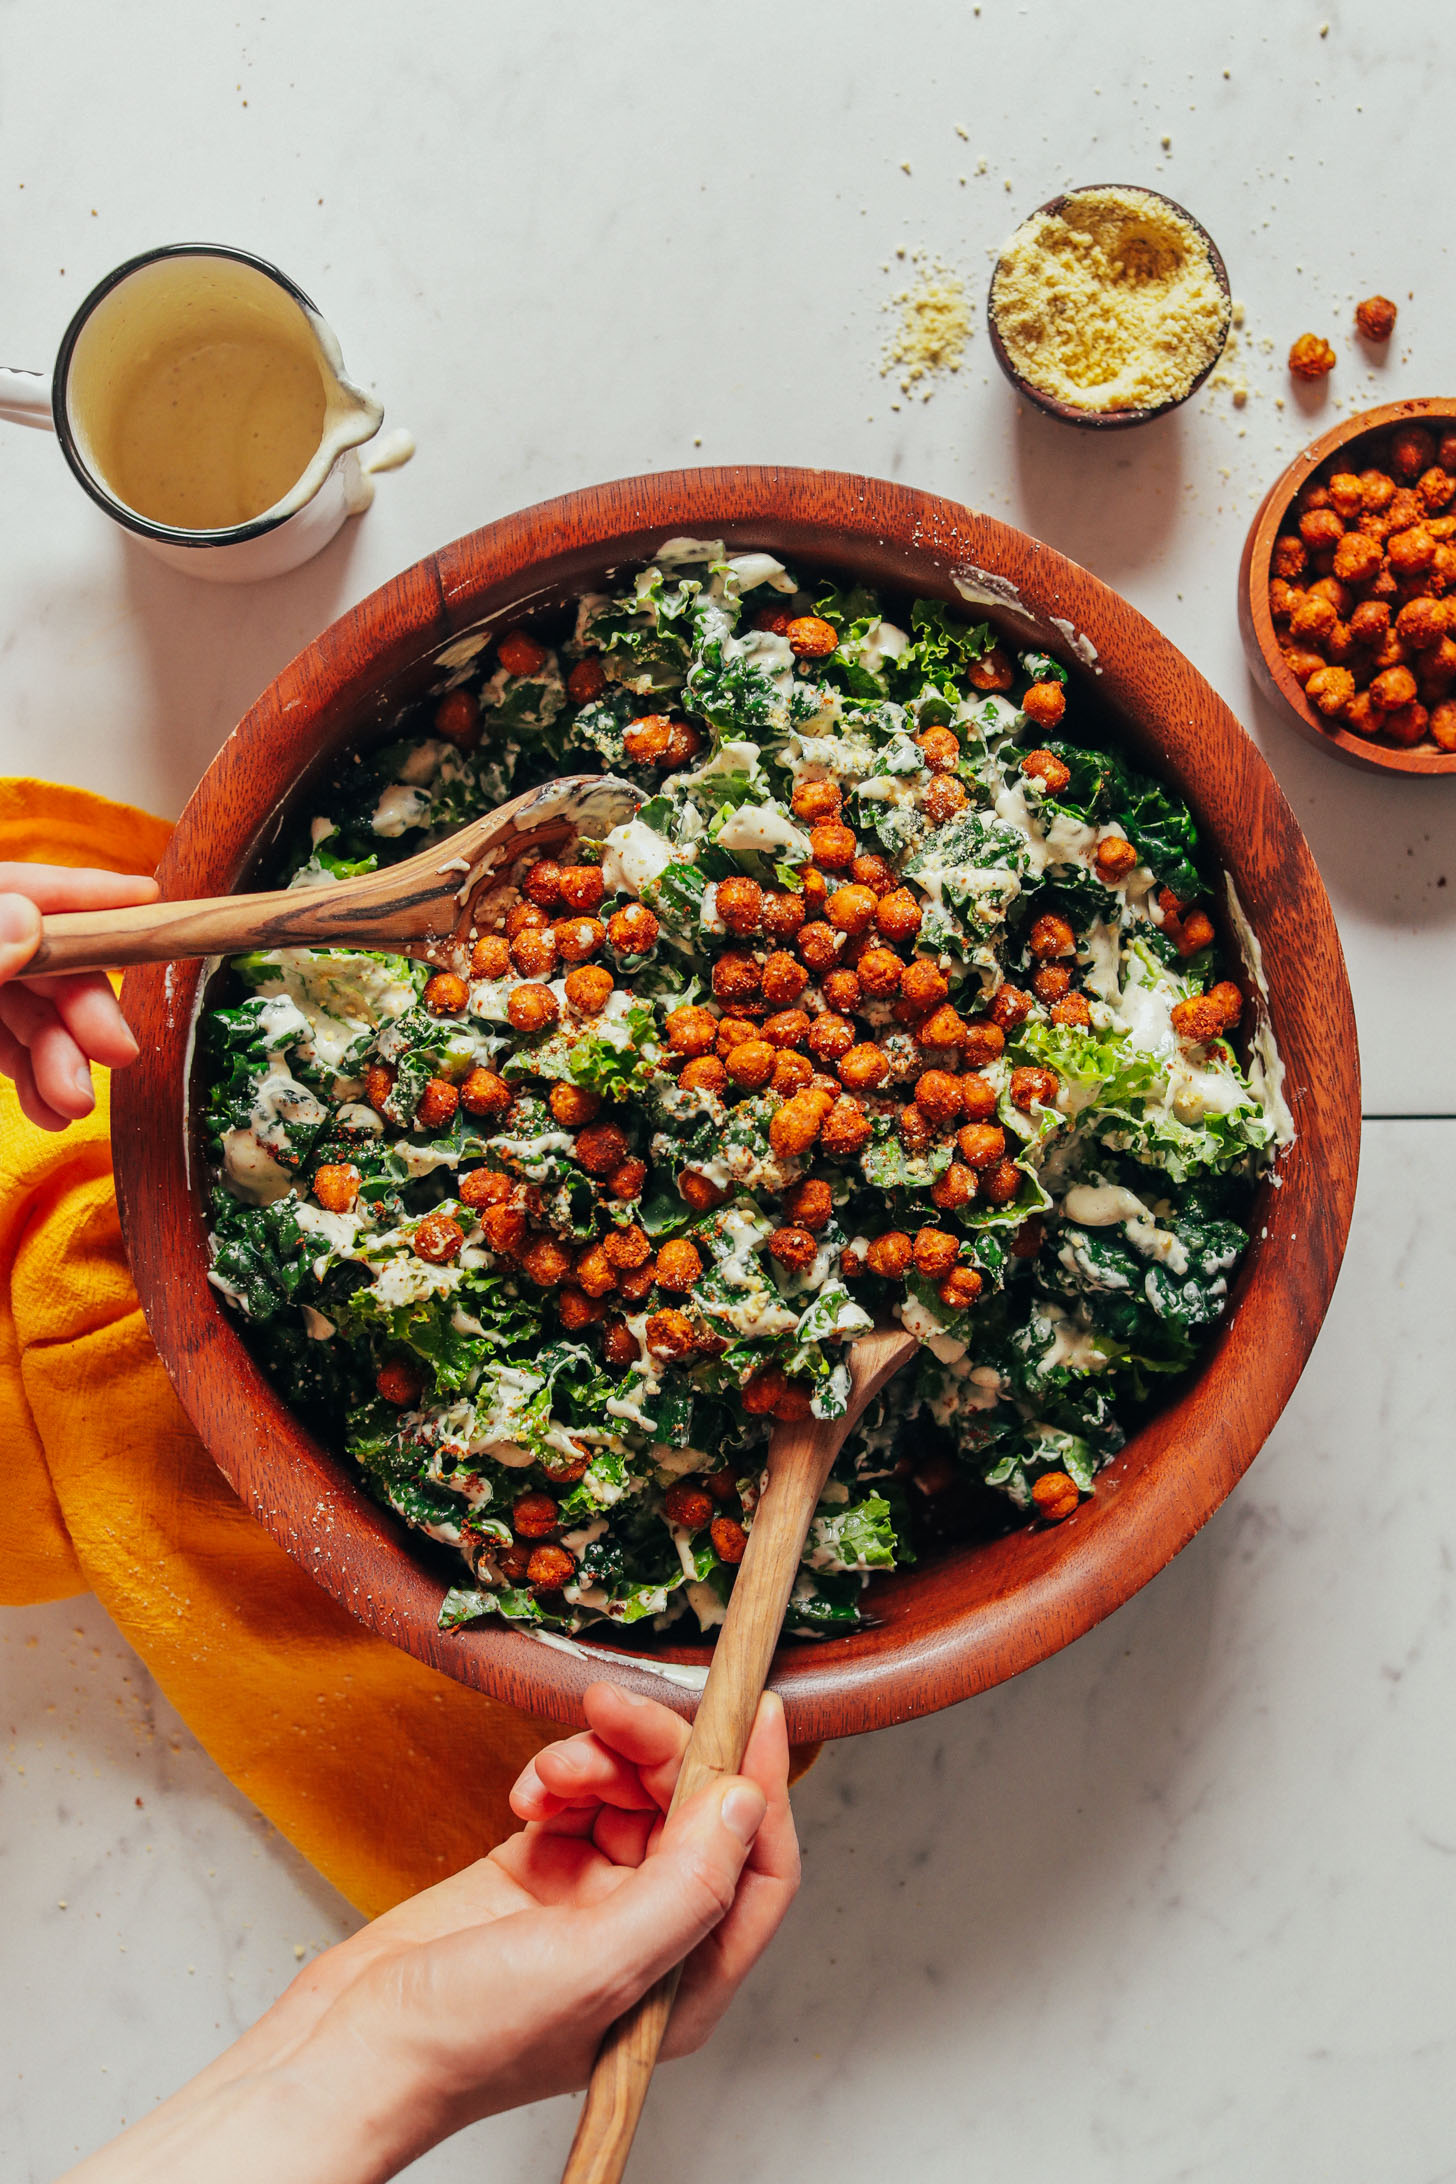 Using wooden salad spoons to toss a bowl of Chickpea Kale Salad topped with tandoori chickpeas